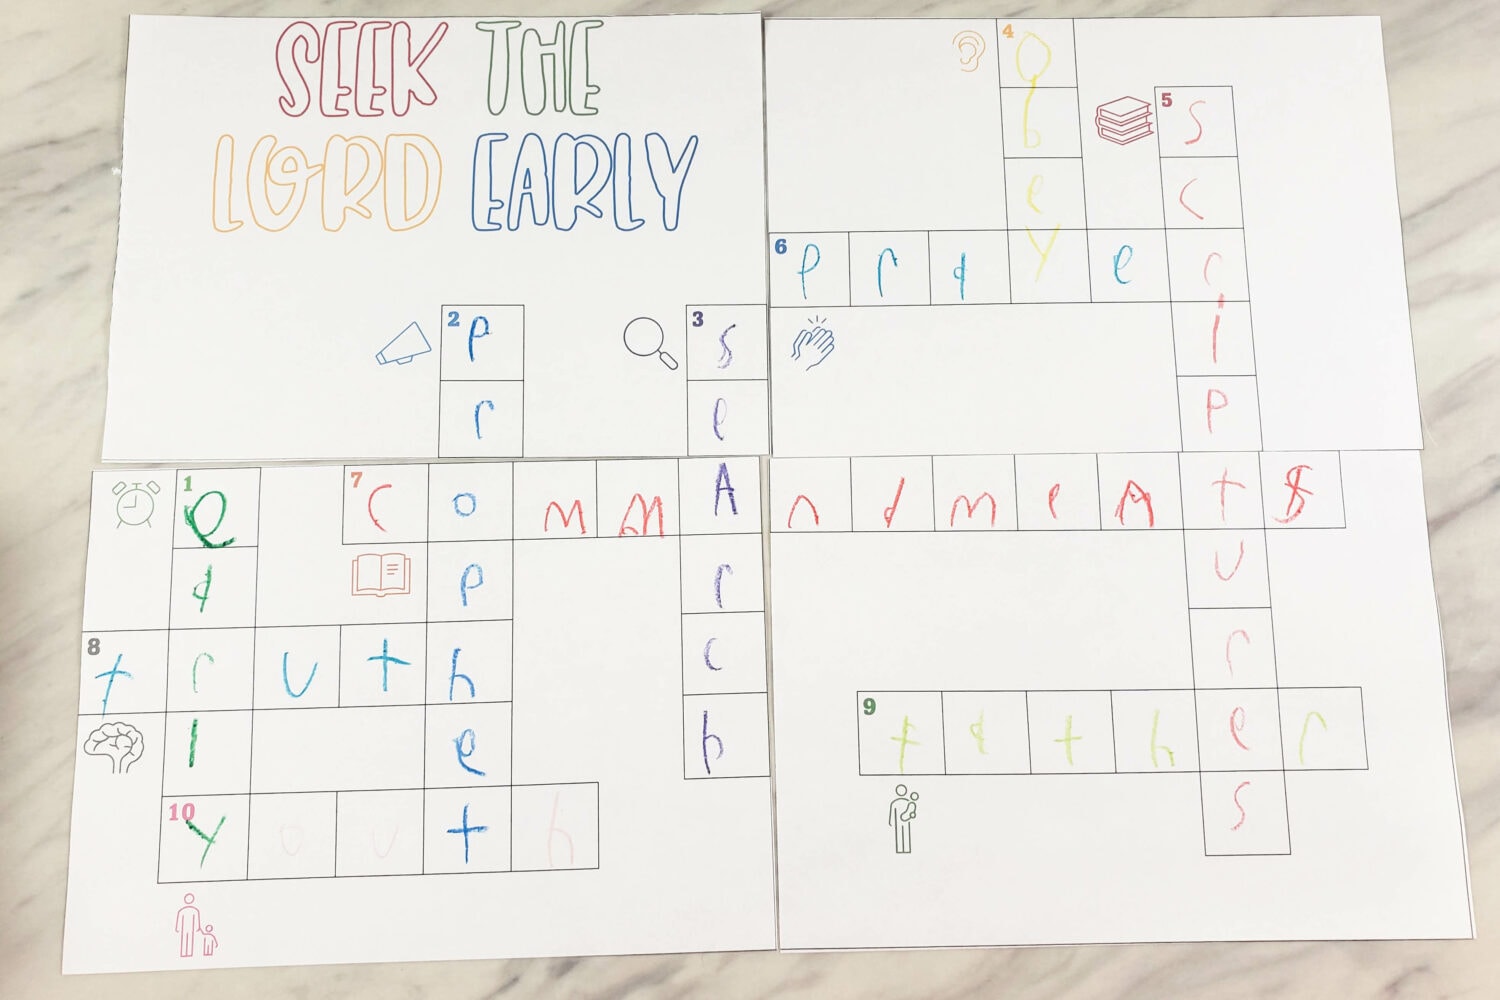 Seek the Lord Early Crossword Puzzles singing time ideas to fill in keywords with simple clues and printable song helps for LDS Primary Music Leaders